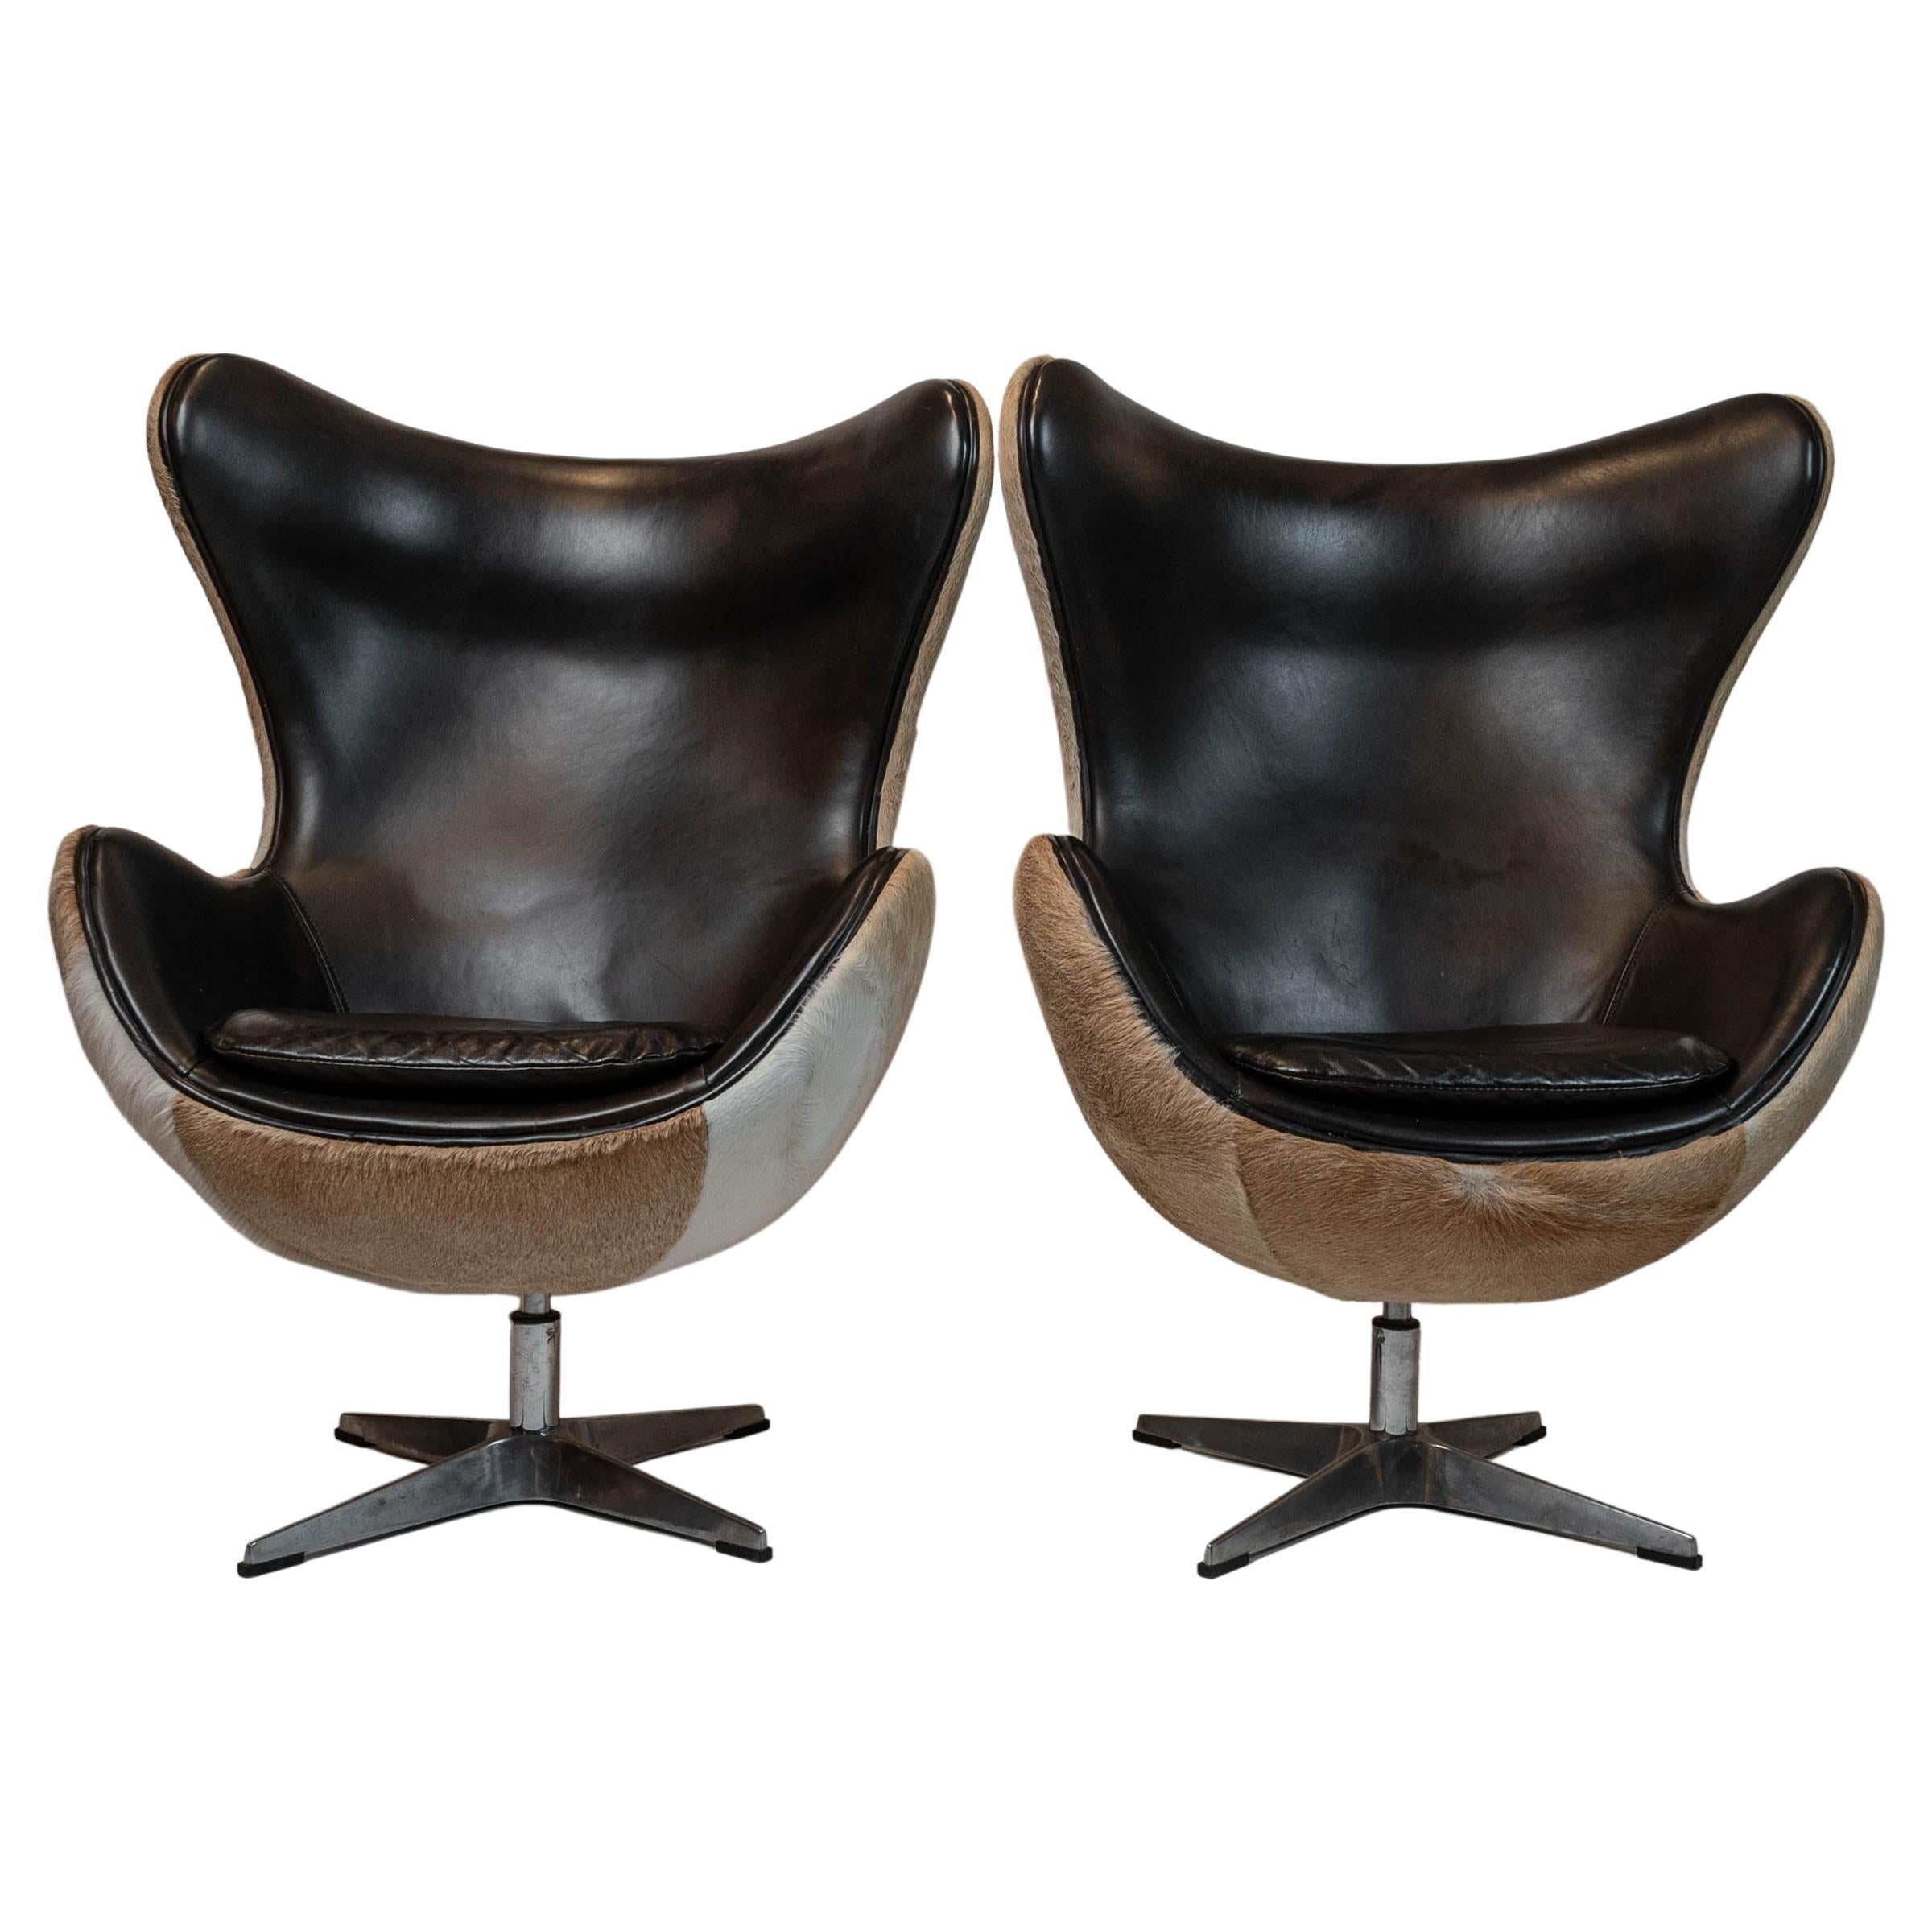 Sensational Pair of Hair on Hide & Leather Arne Jacobsen Inspired Egg Chairs For Sale